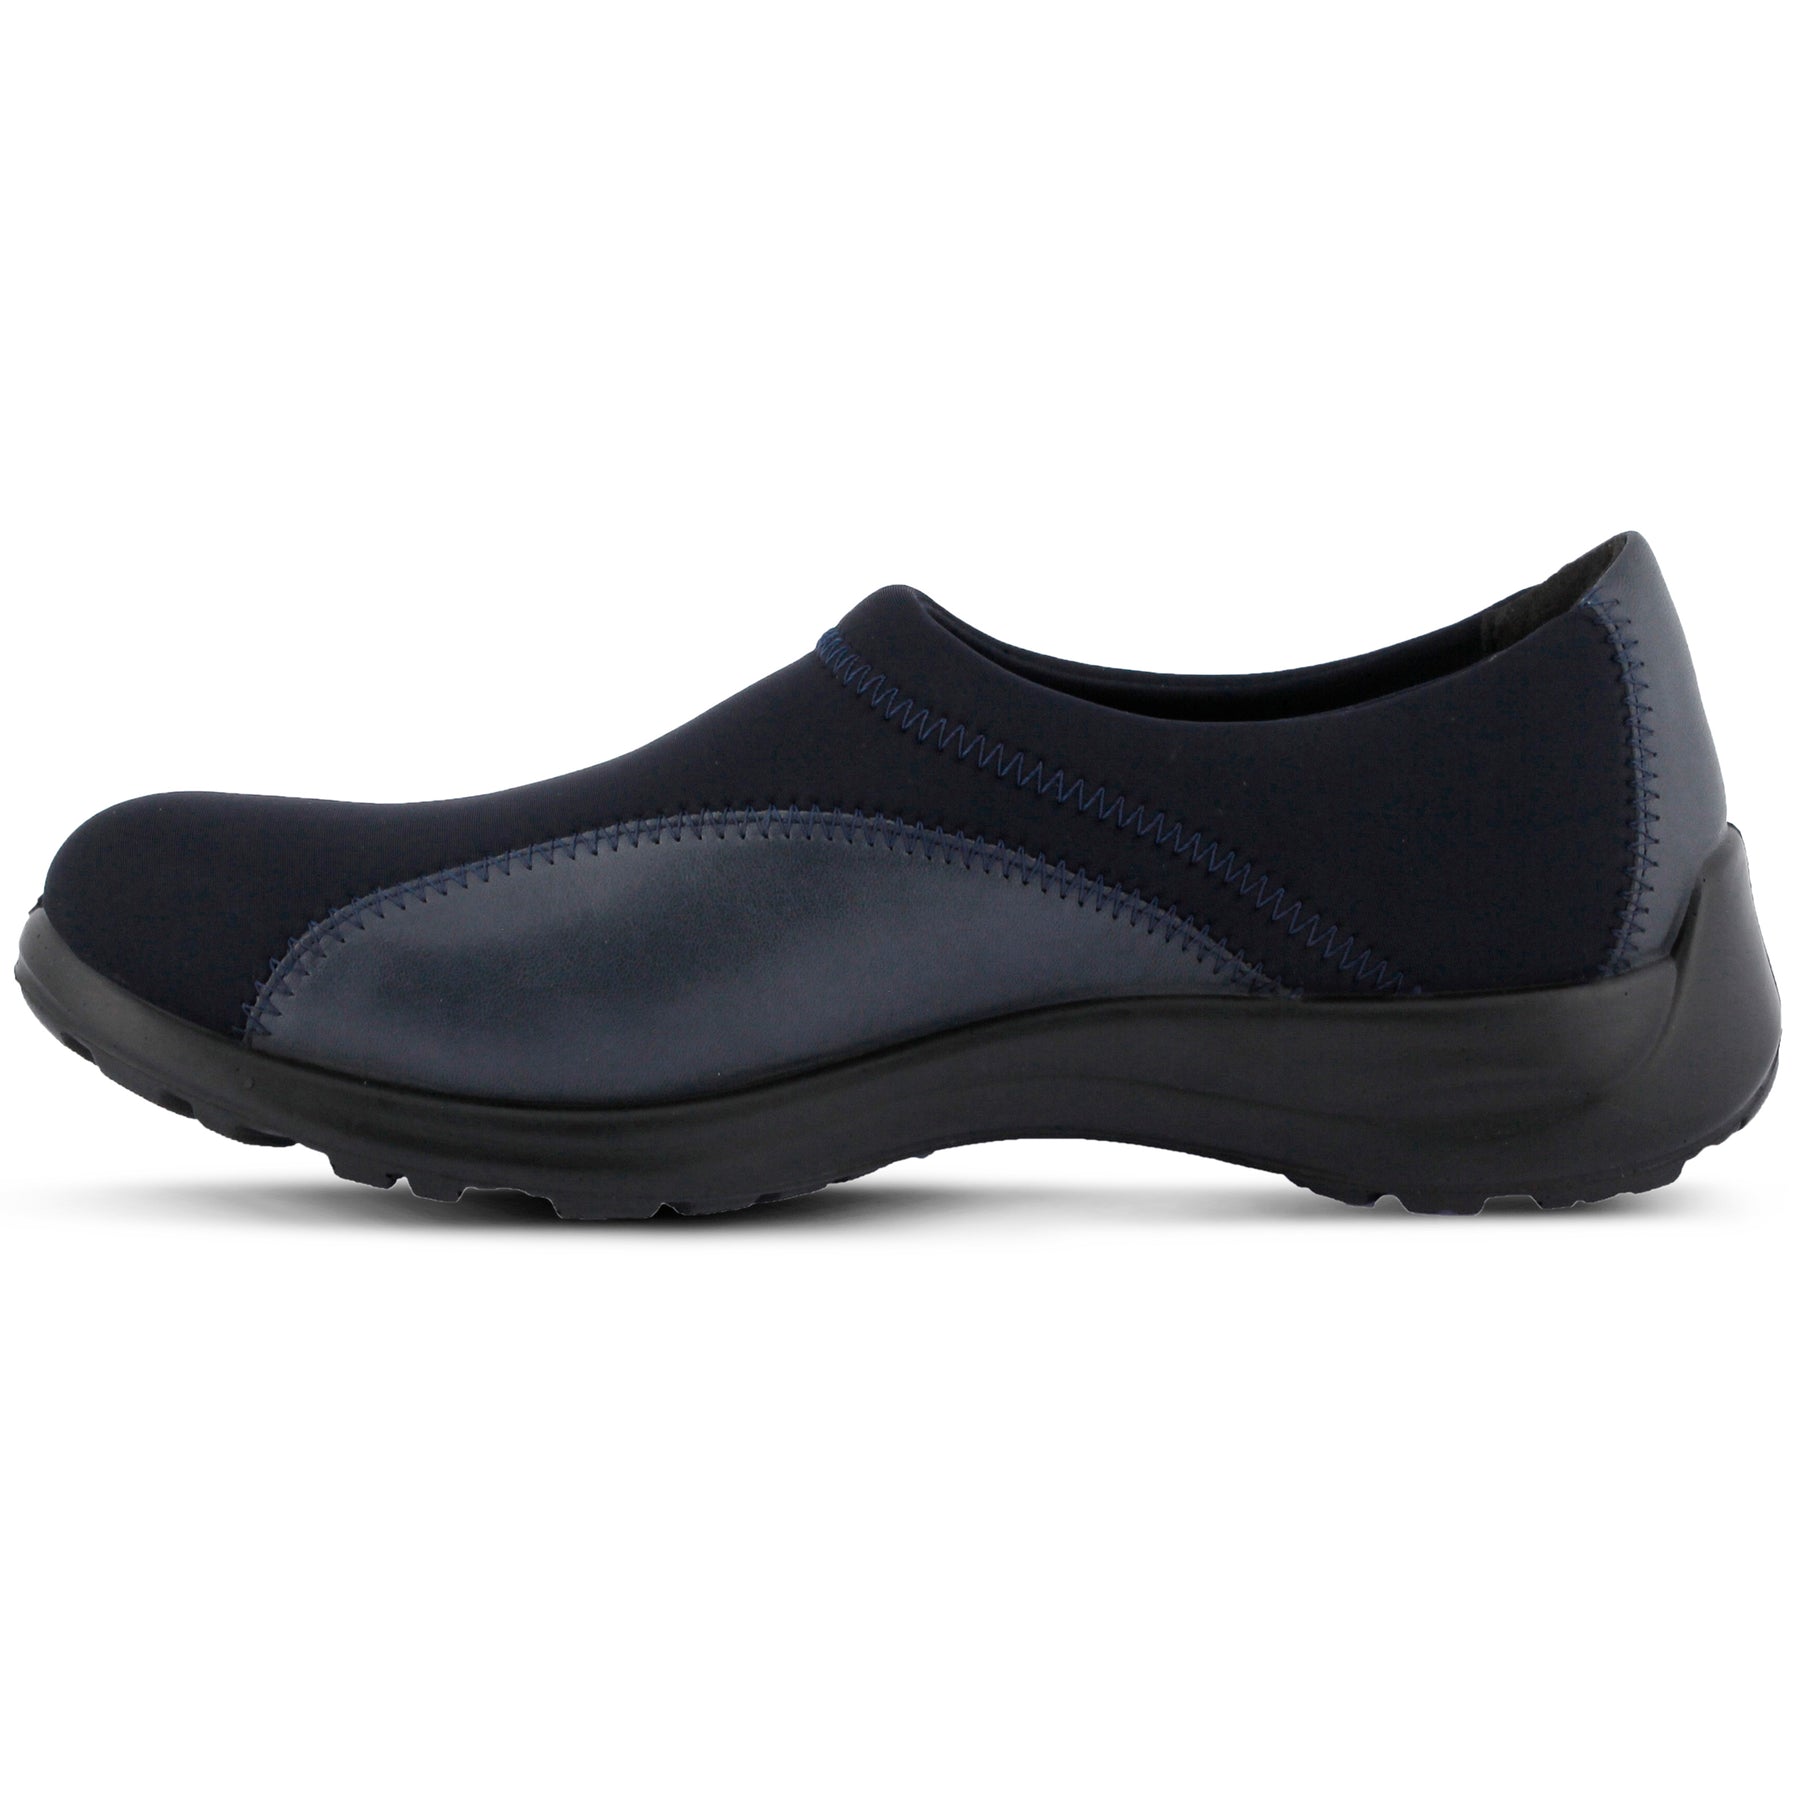 BLACK WILLOW SLIP-ON SHOE by FLEXUS – Spring Step Shoes